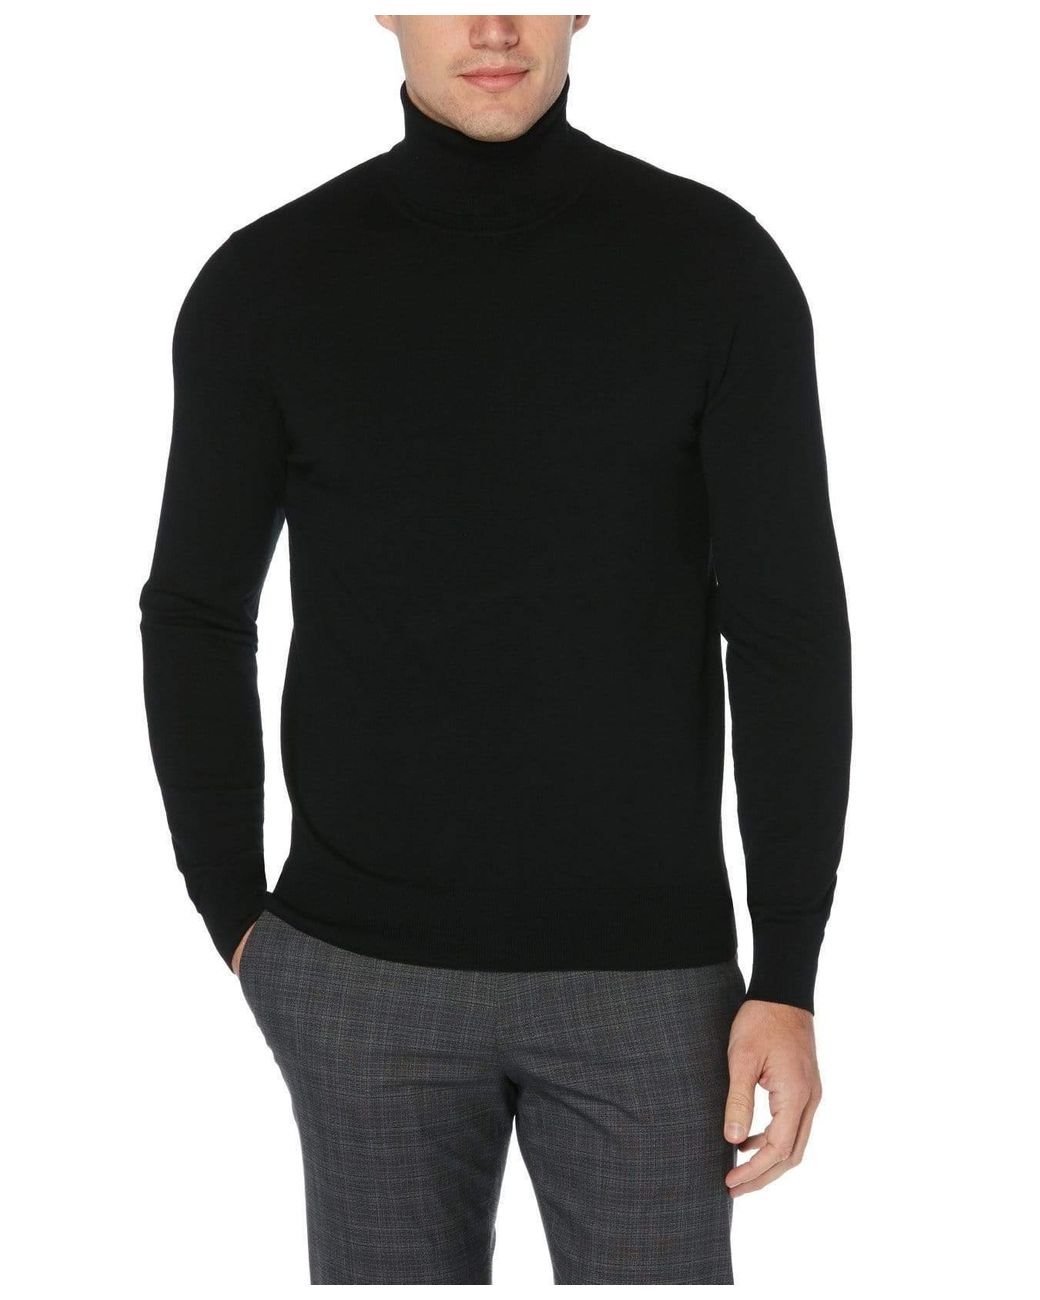 Perry Ellis Synthetic Solid Tech Turtleneck Sweater in Black for Men - Lyst